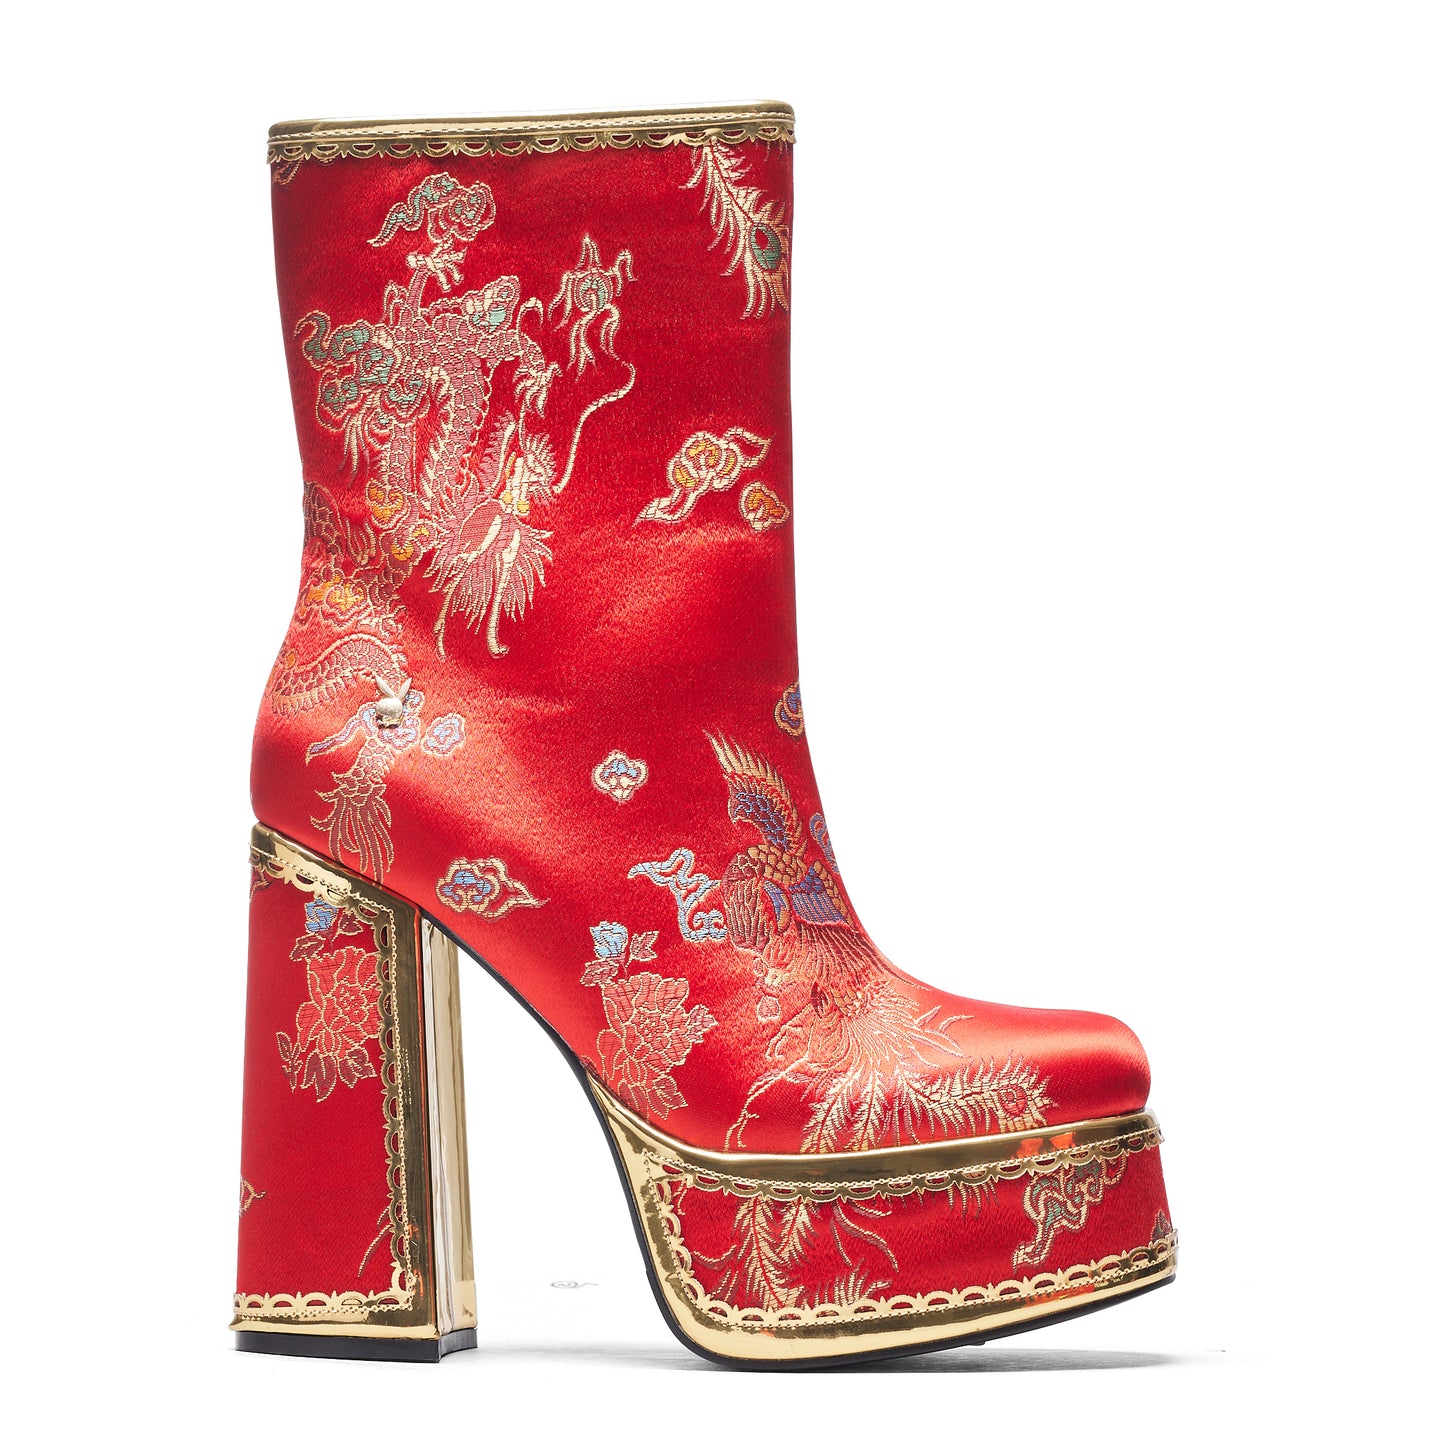 The Ornate Soul Playboy Red Heeled Boots - Ankle Boots - KOI Footwear - Red - Side View